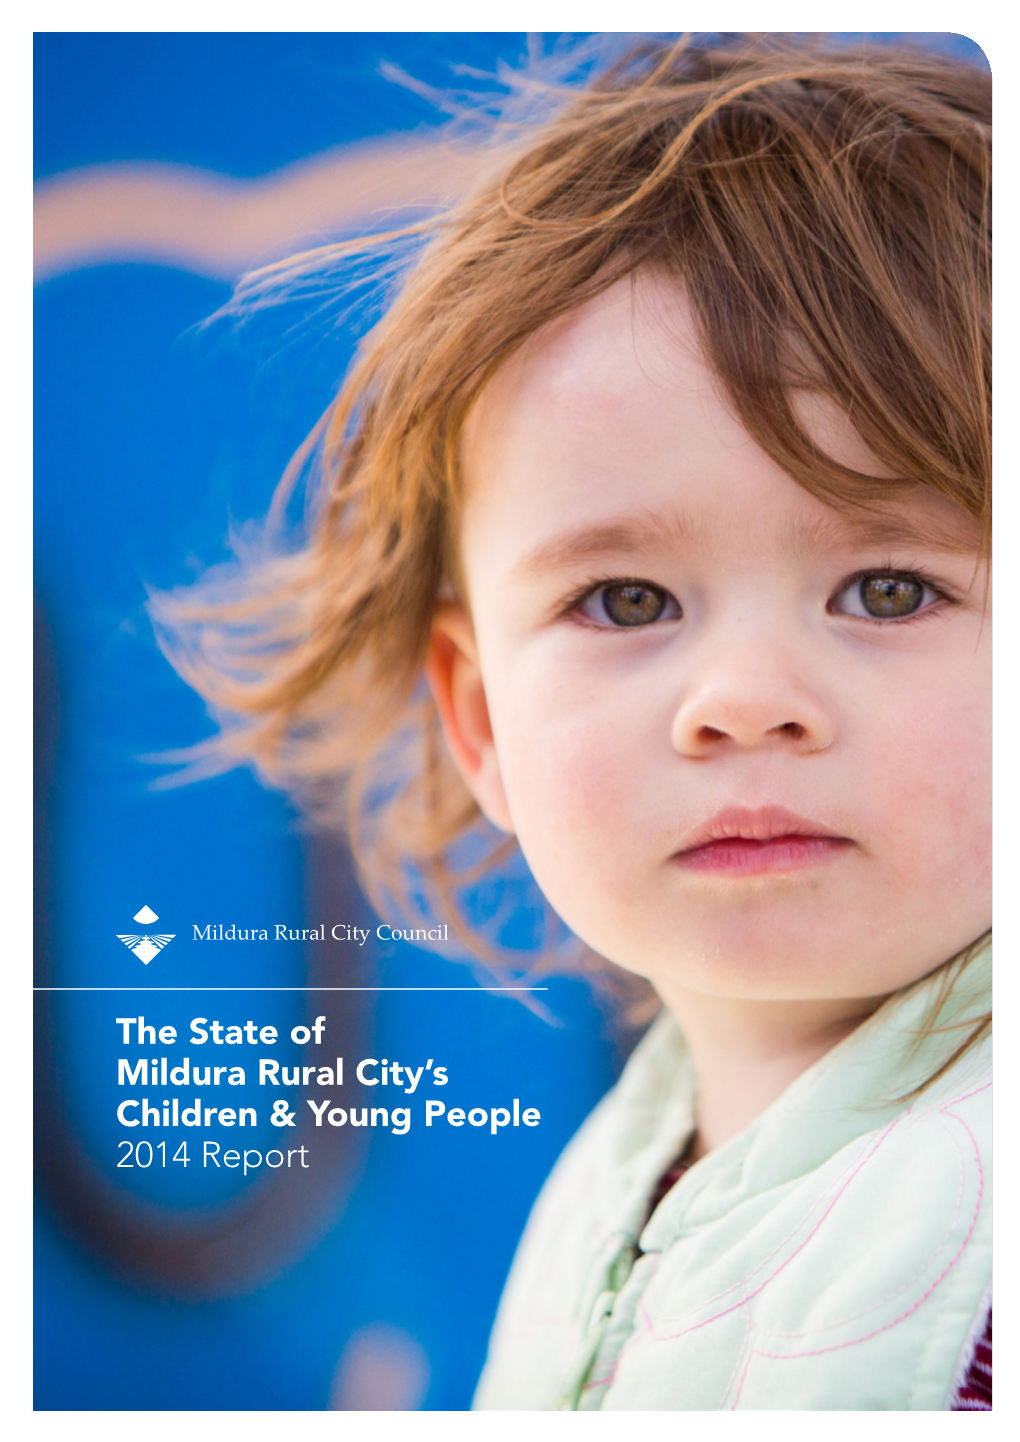 The State of Mildura Rural City's Children & Young People 2014